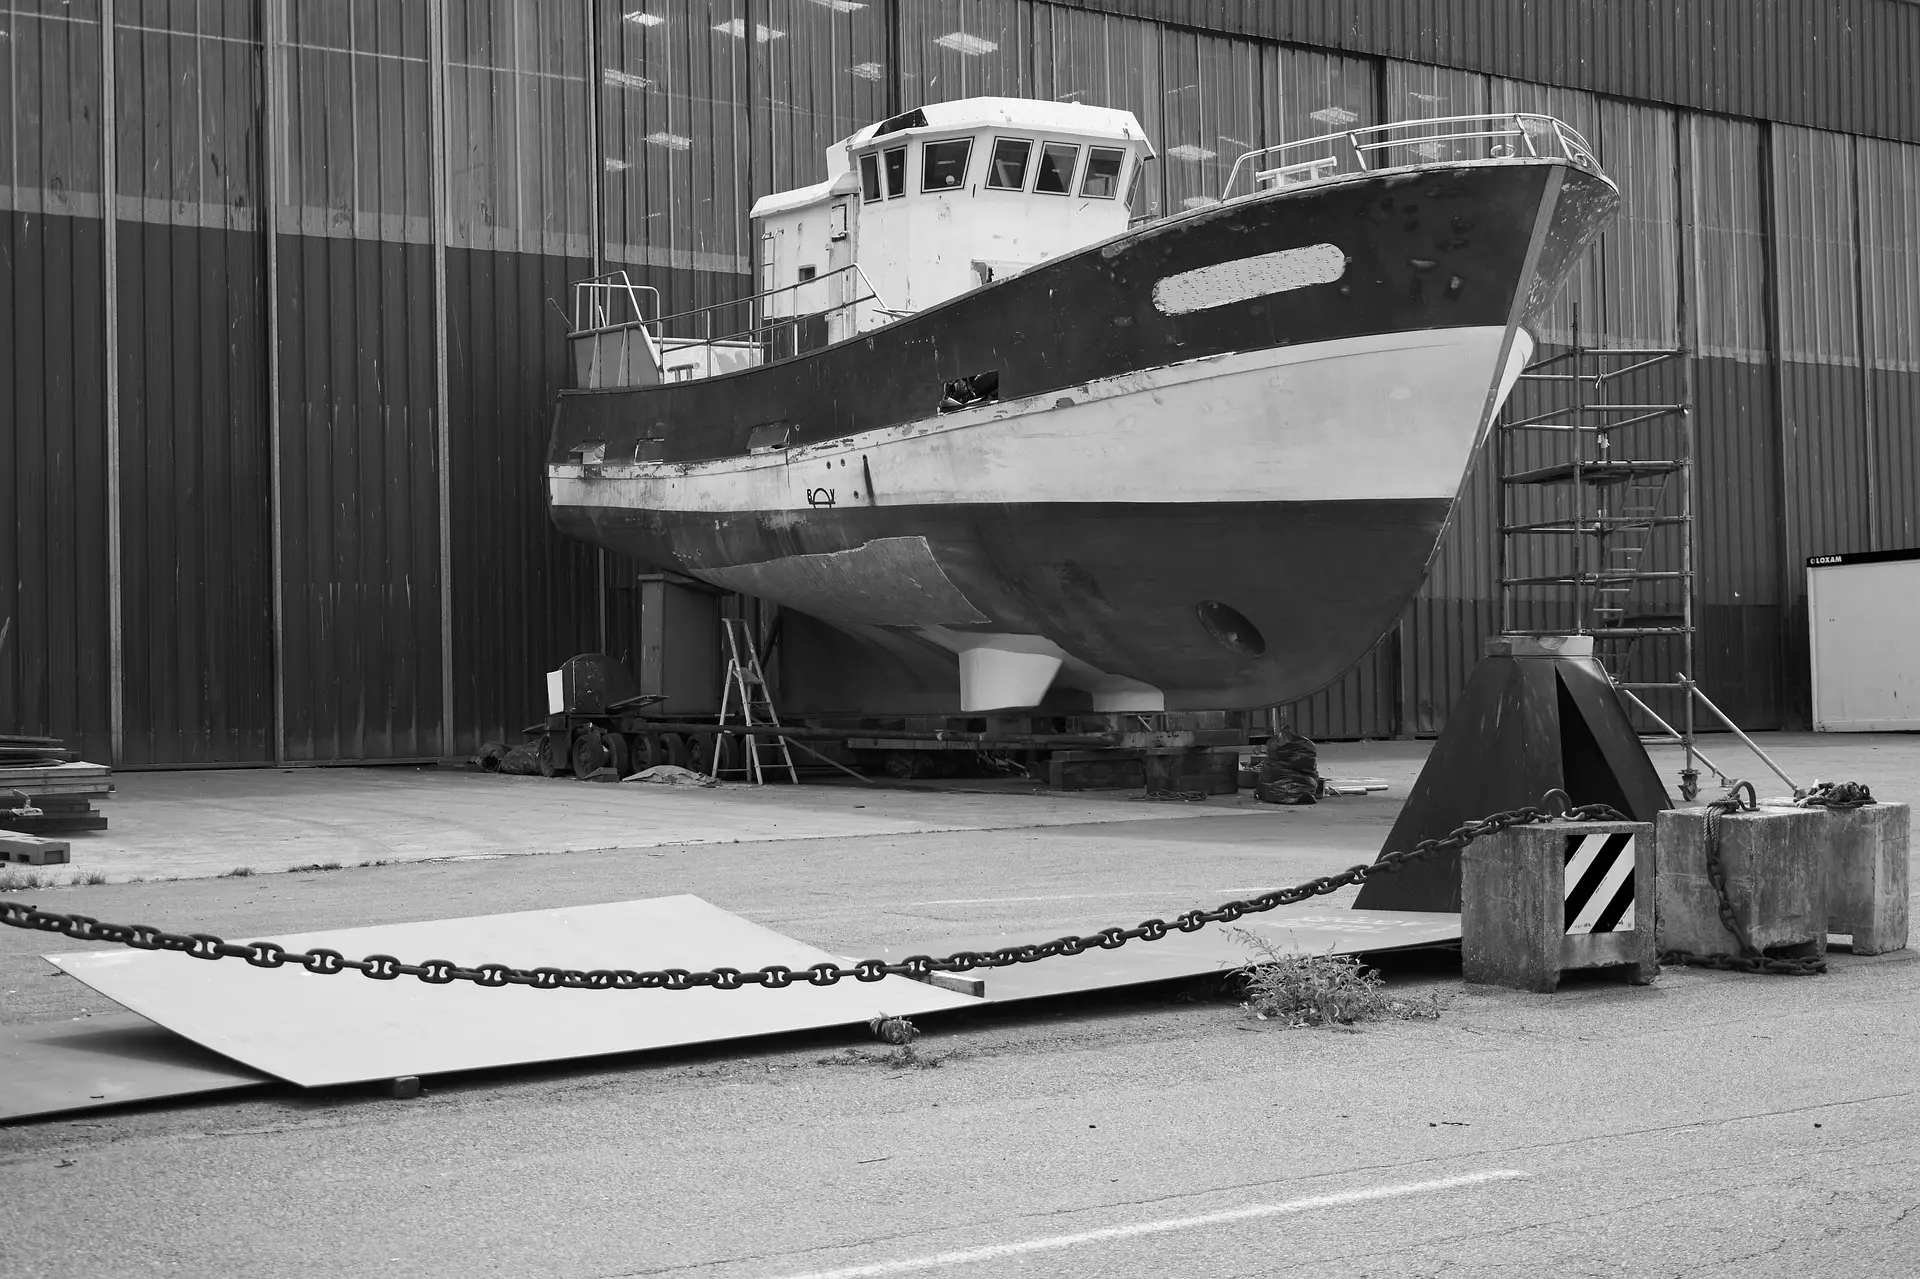 A boat hauled out of the water at a shipyard